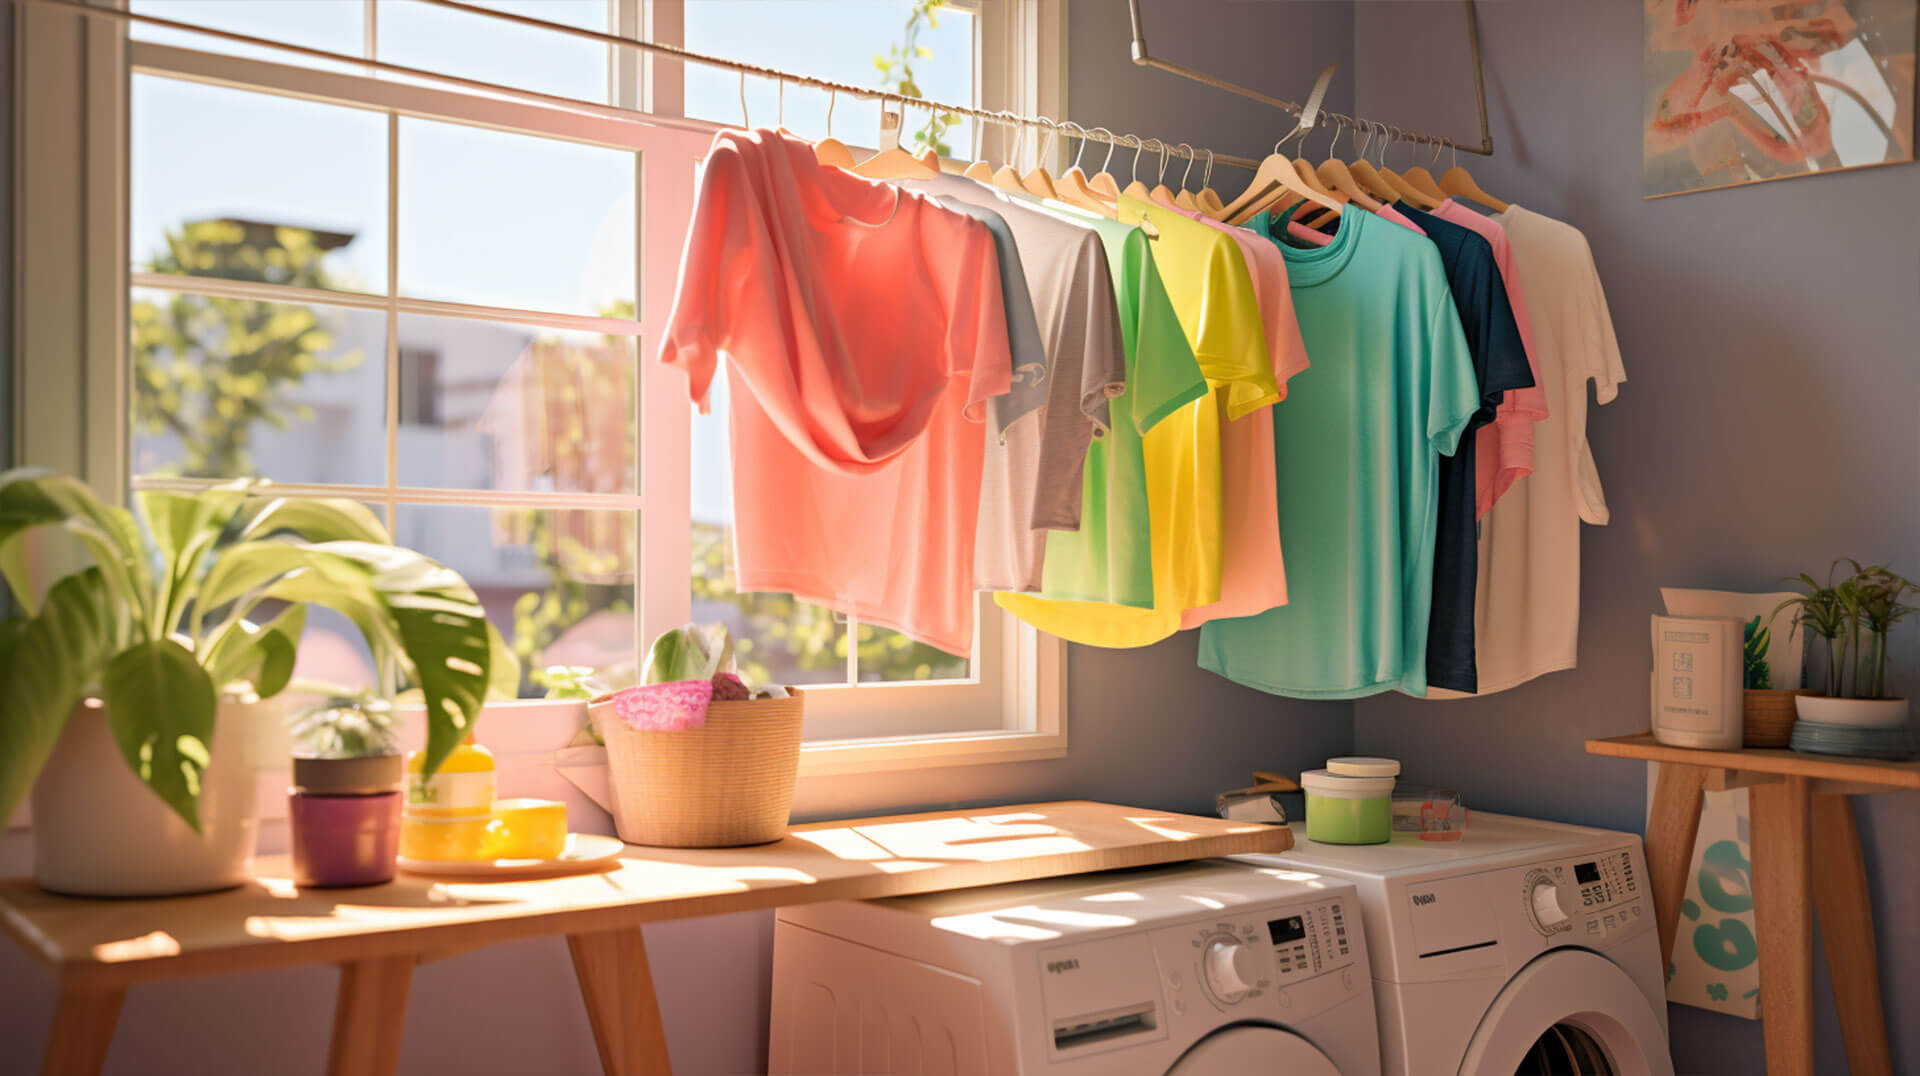 bright, sunlit laundry room with colorful workout clothes hanging on a clothesline